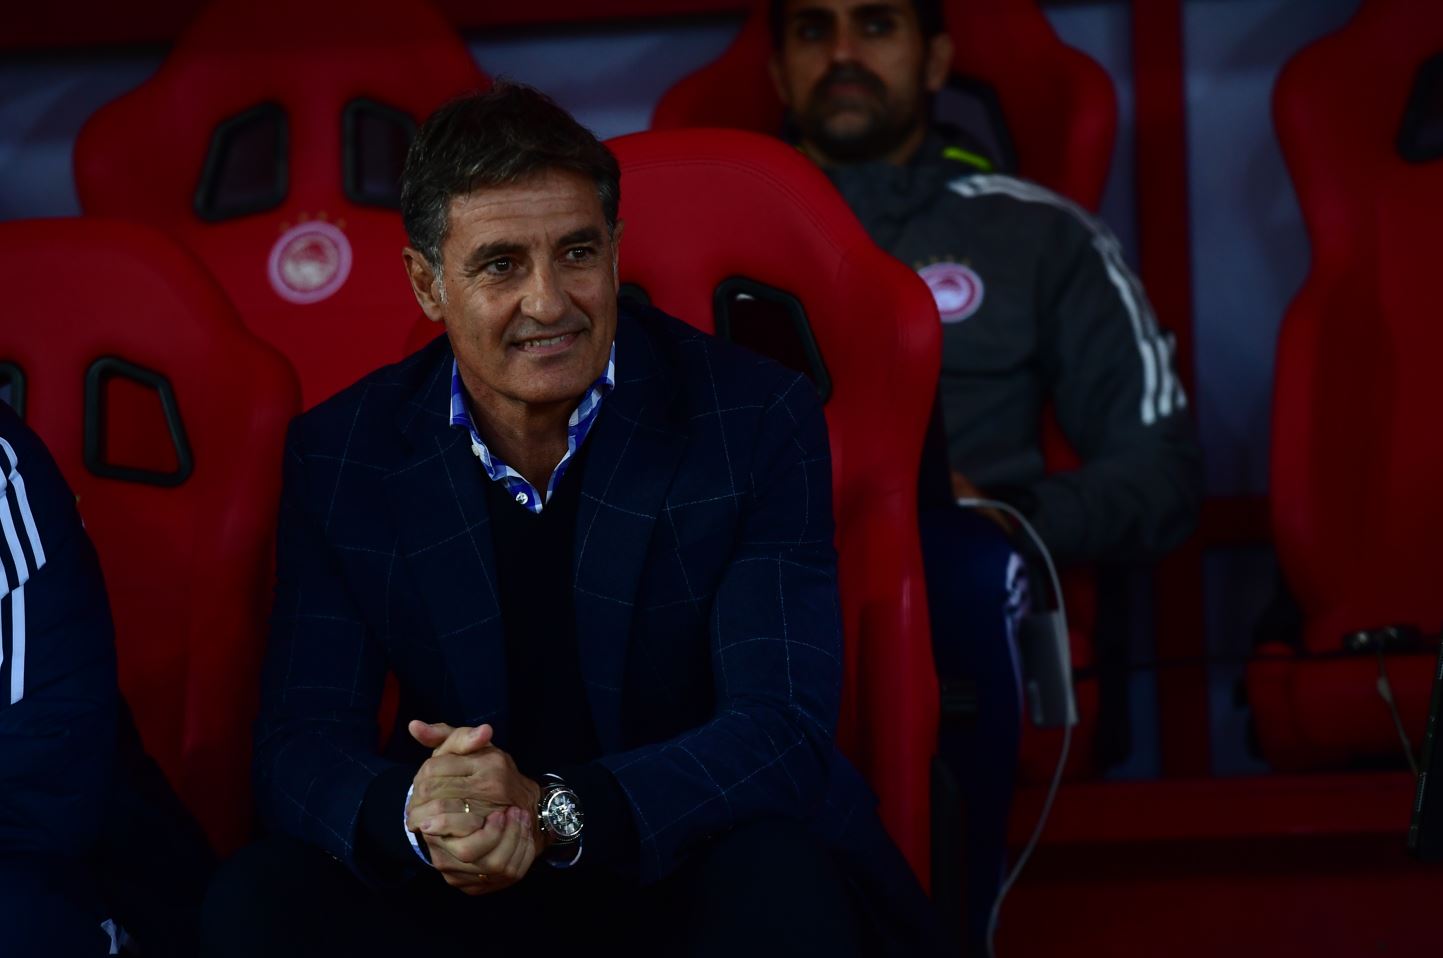 Míchel: “I want the team of Olympiacos that I saw in the second half”